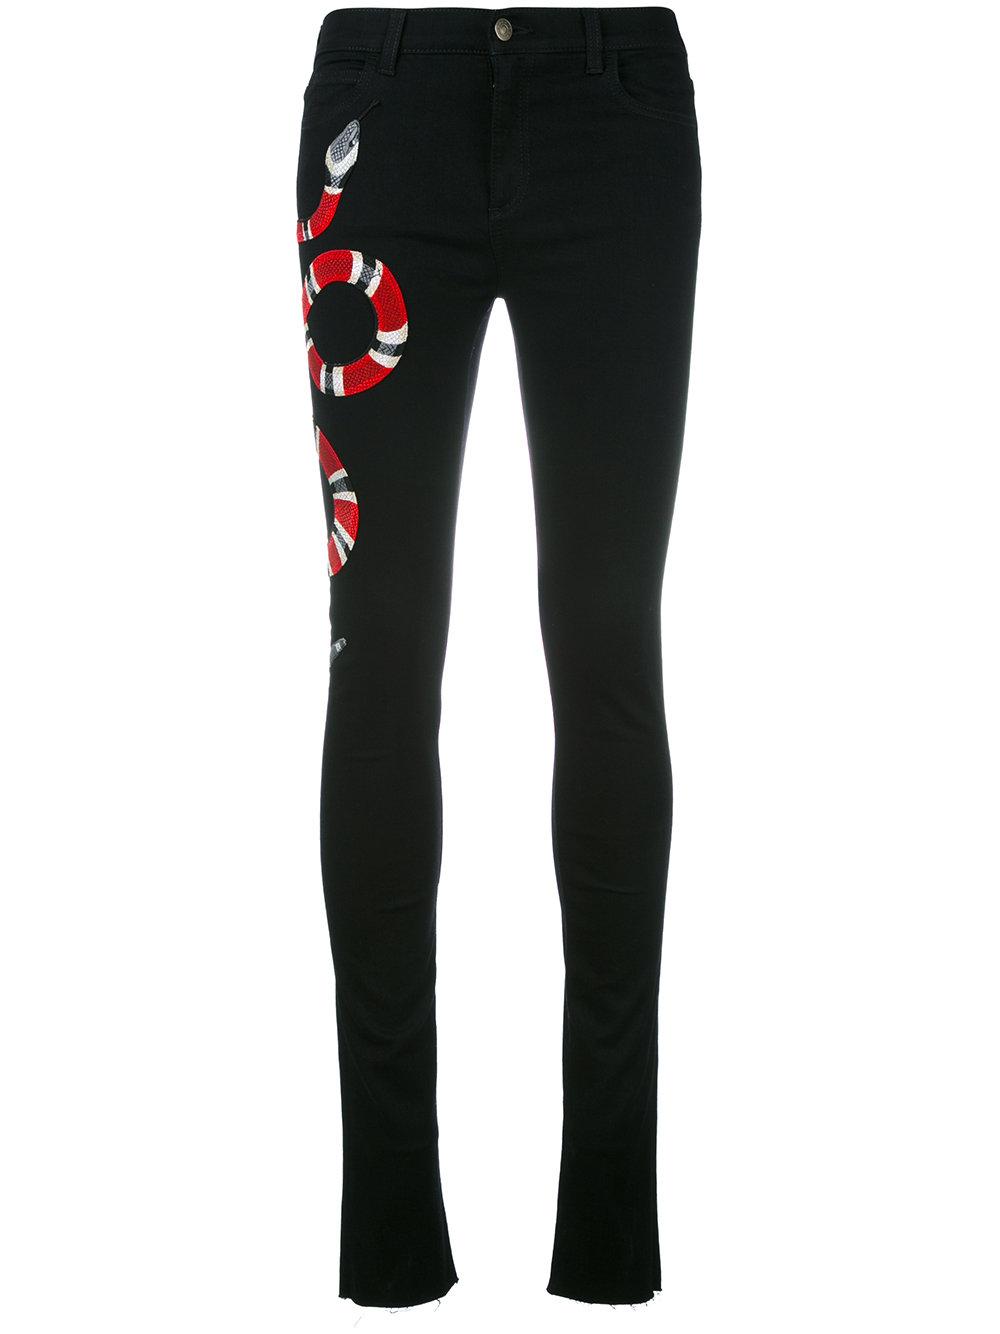 Gucci Denim Snake Embroidered Skinny Jeans in Black - Lyst